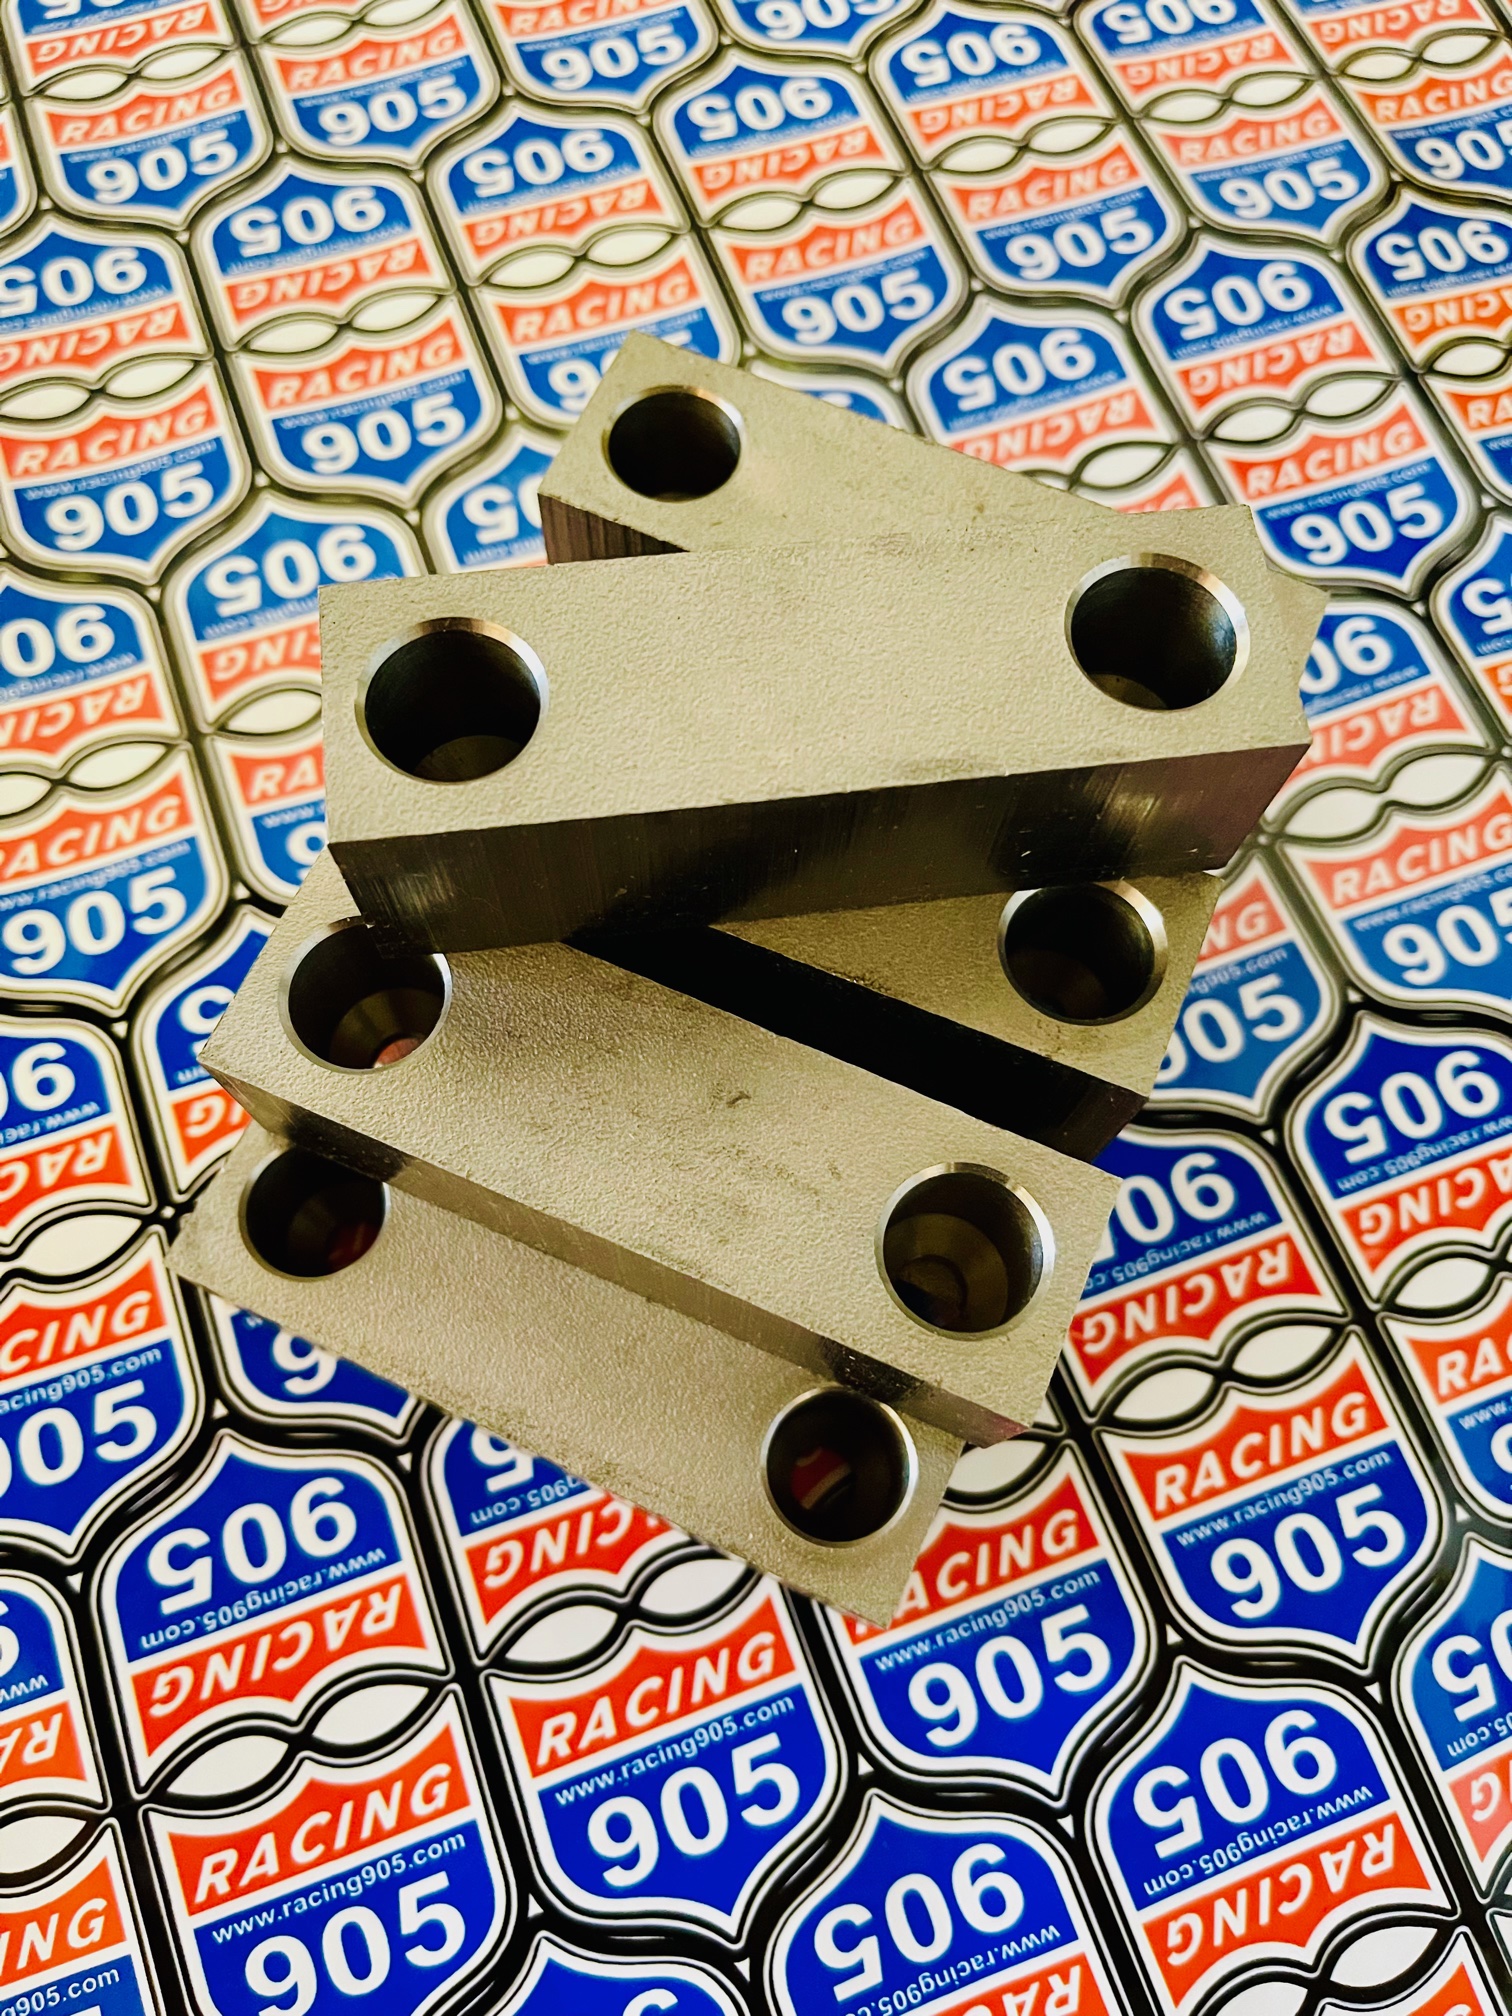 Replacement Titanium for Racing 905 Triangle Bar